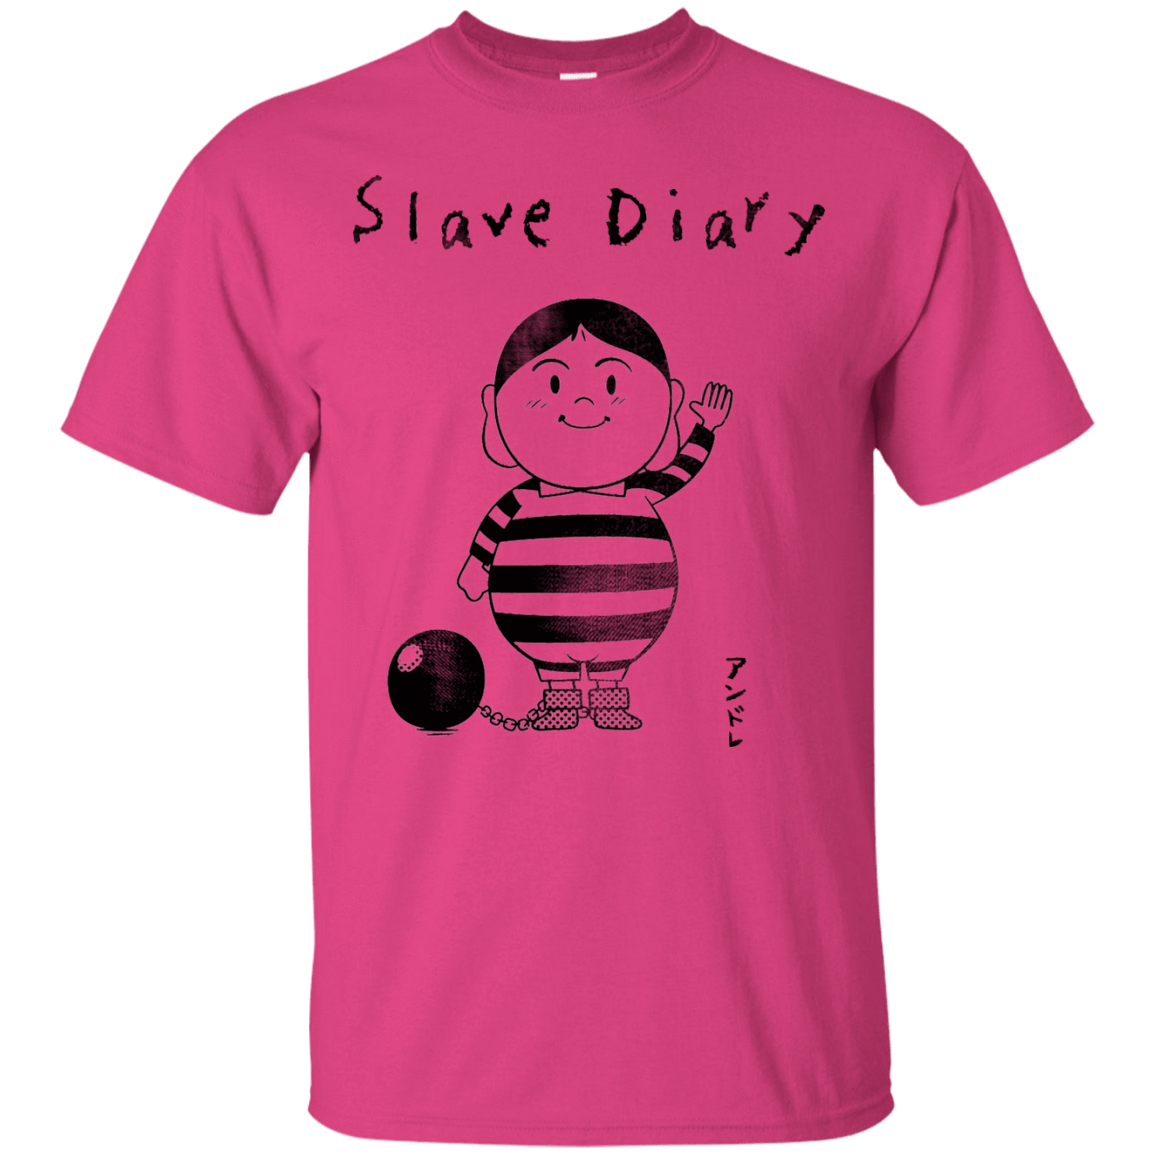 T-Shirts Heliconia / S Slave Diary T-Shirt